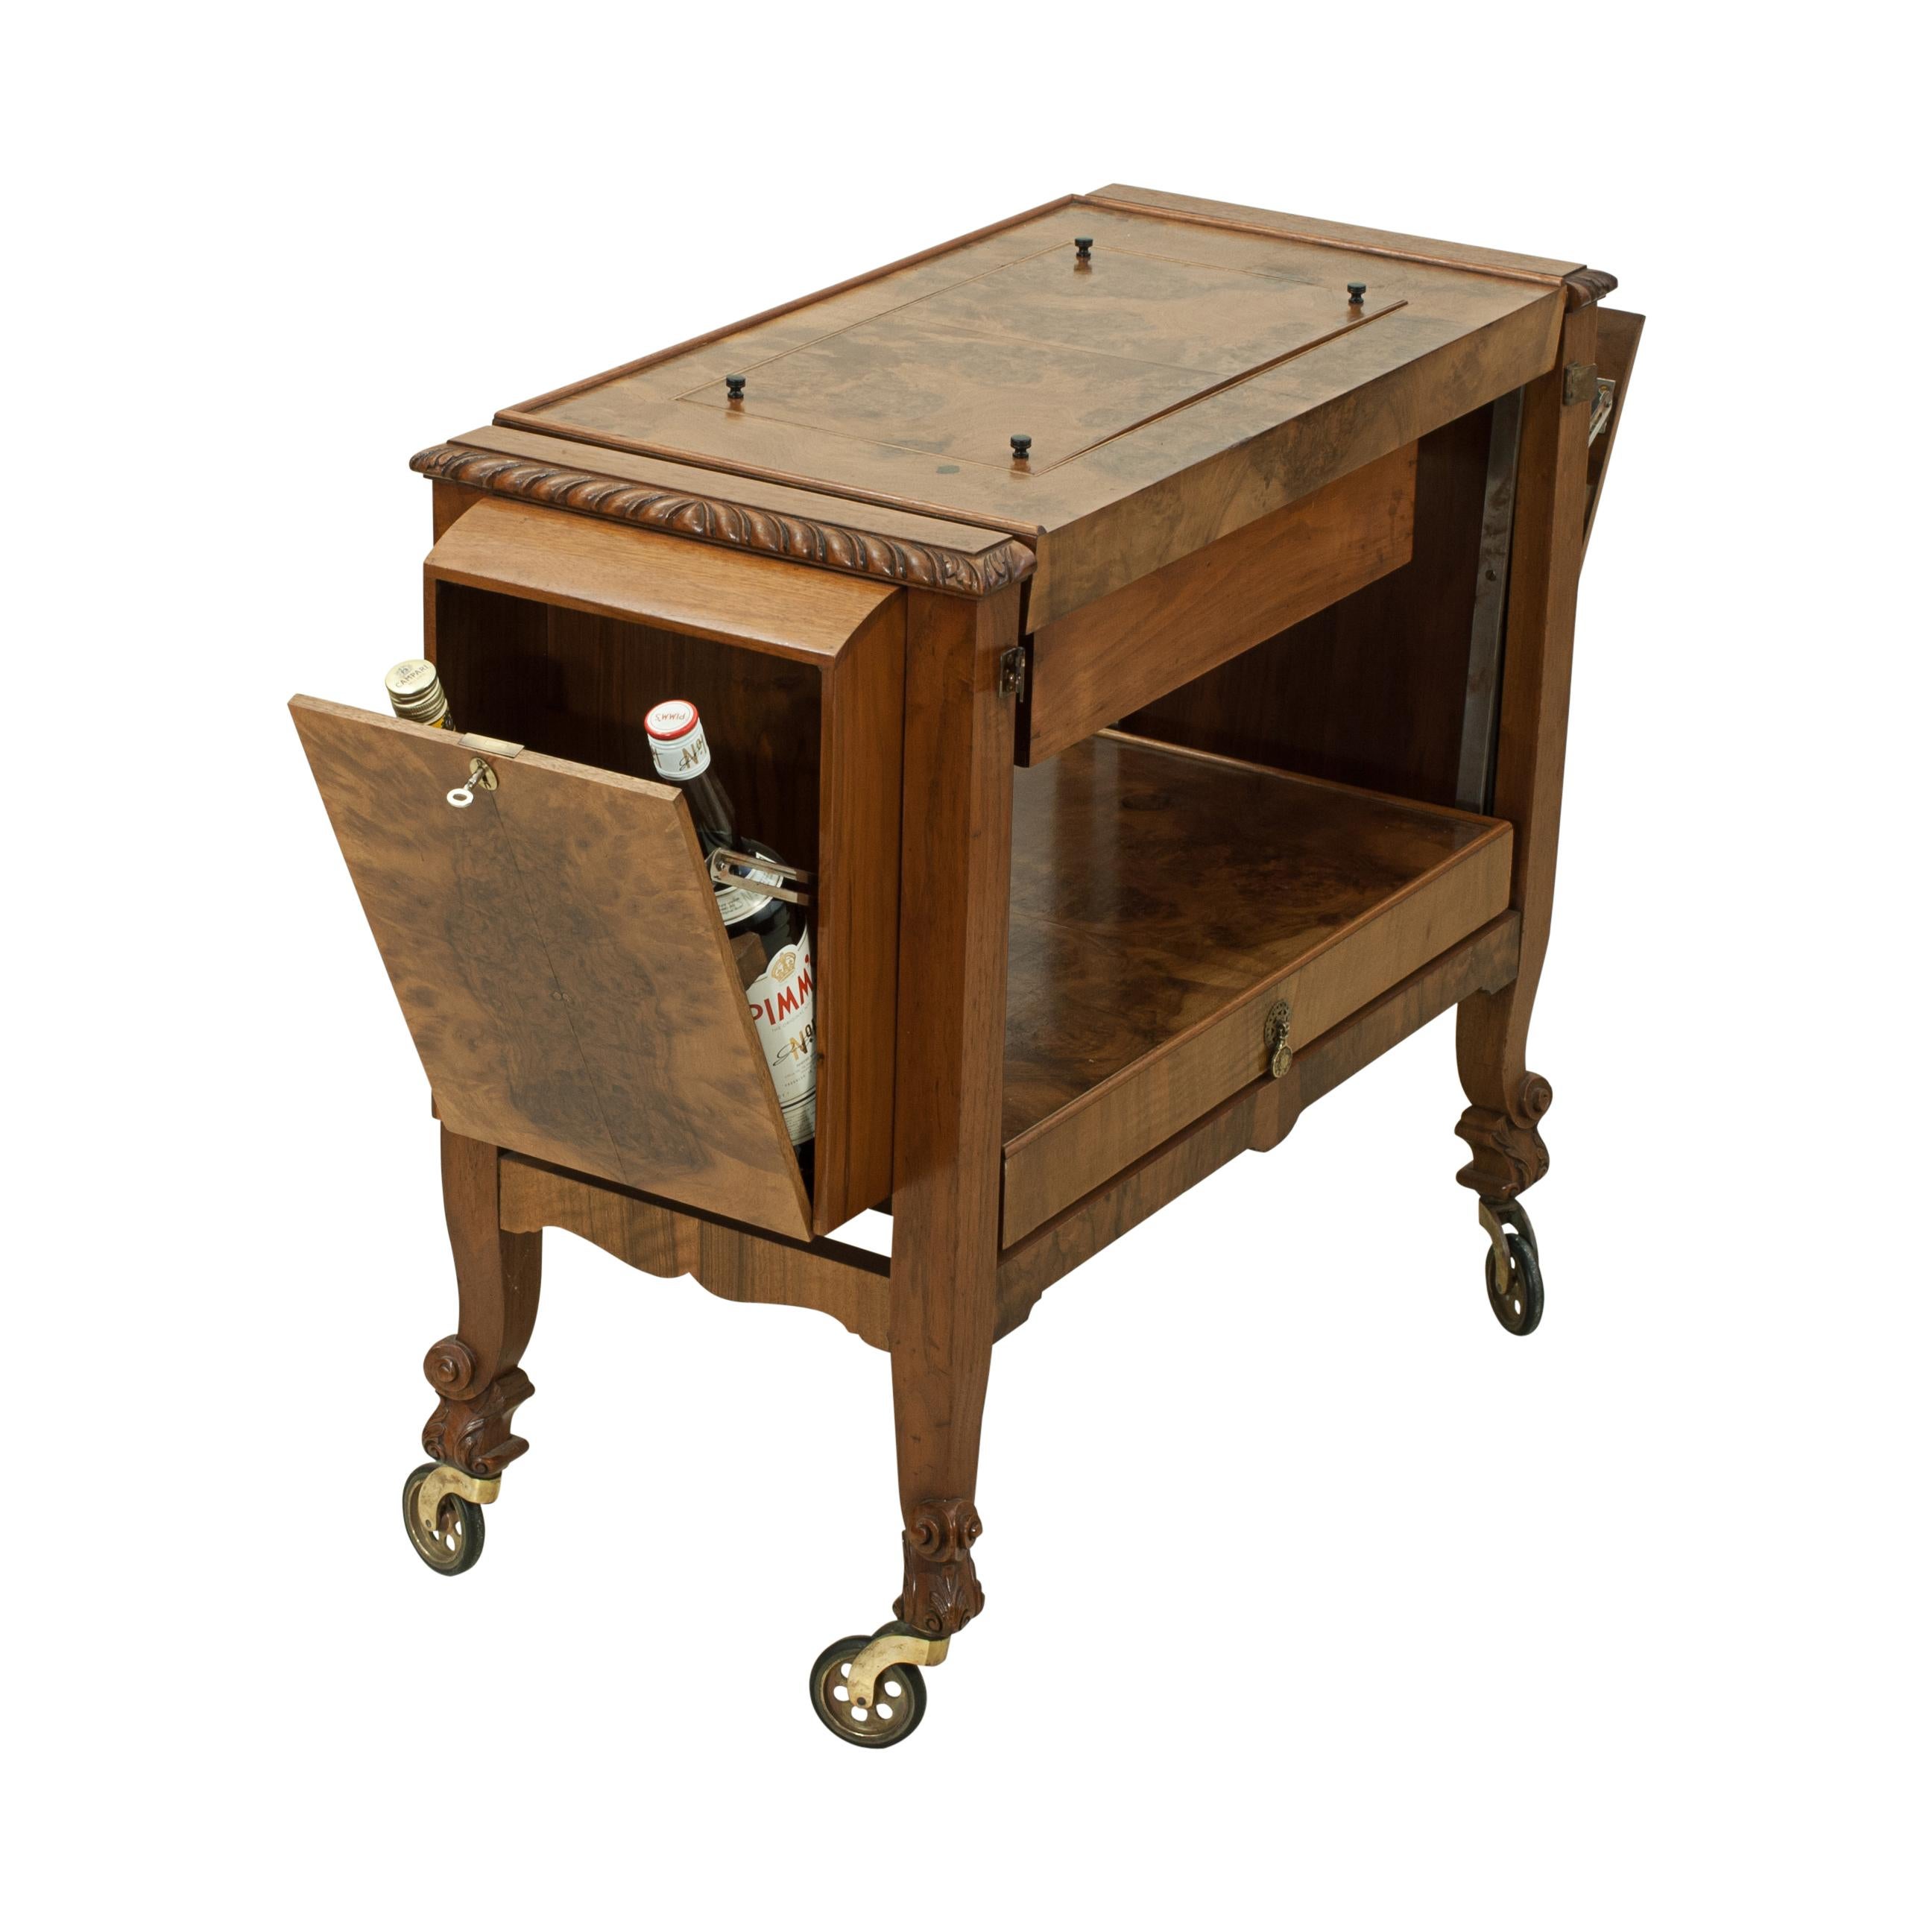 A mid-20th century walnut veneered metamorphic cocktail trolley. The top has a lift-off section that's doubles as a serving tray and when removed reveals a central fitted well which includes a plated cocktail Shaker and two glass bottles (there are